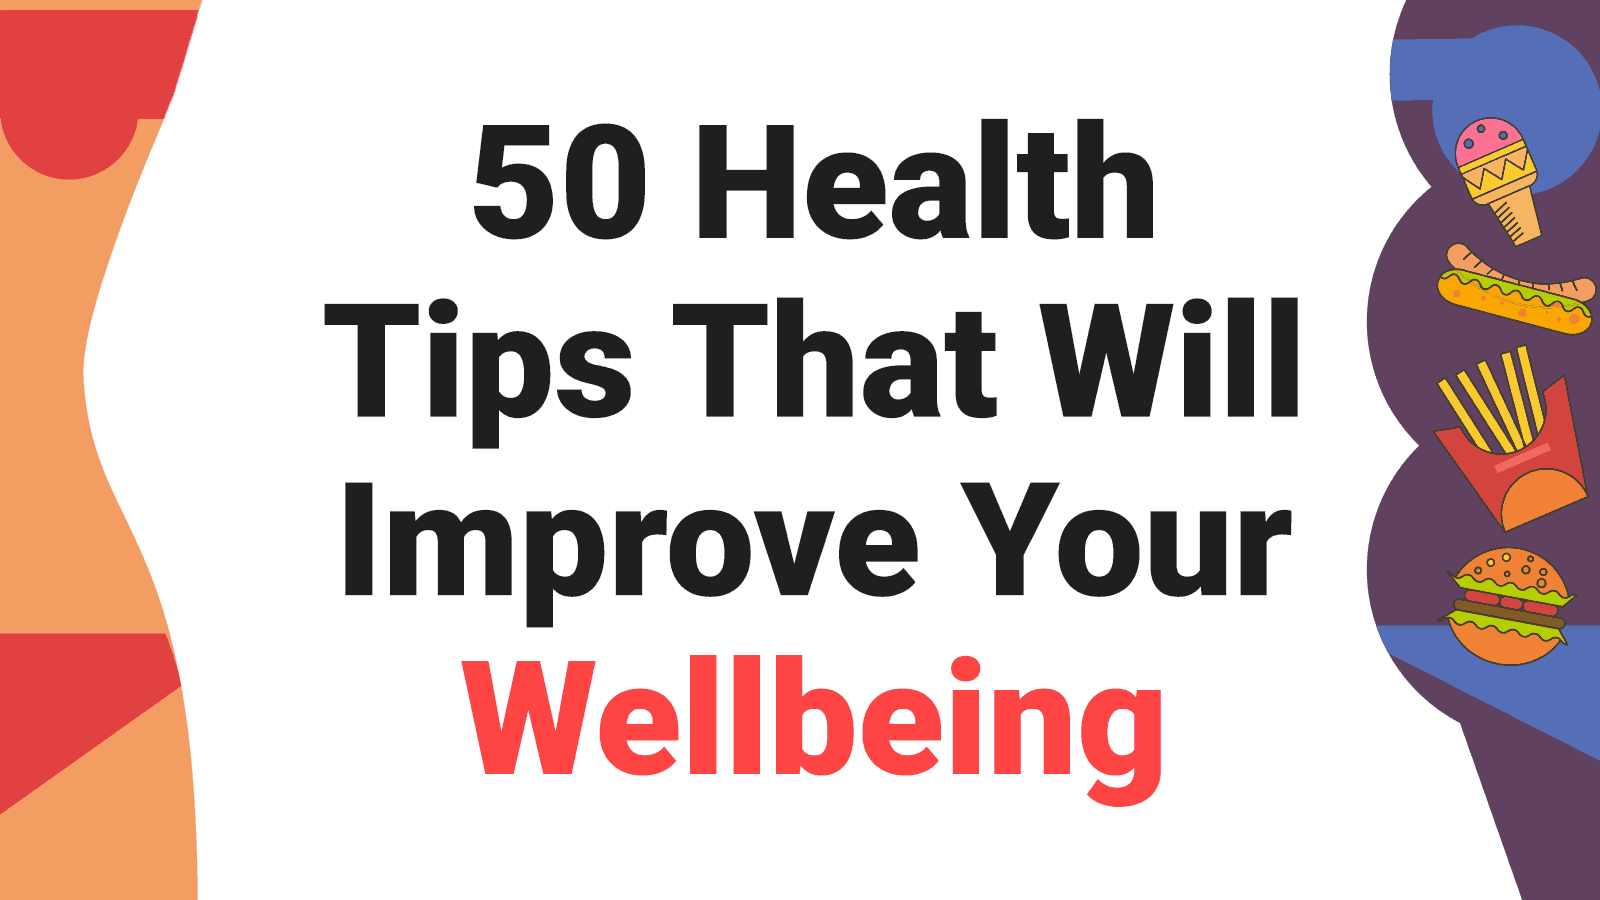 50 Health Tips That Will Improve Your Wellbeing